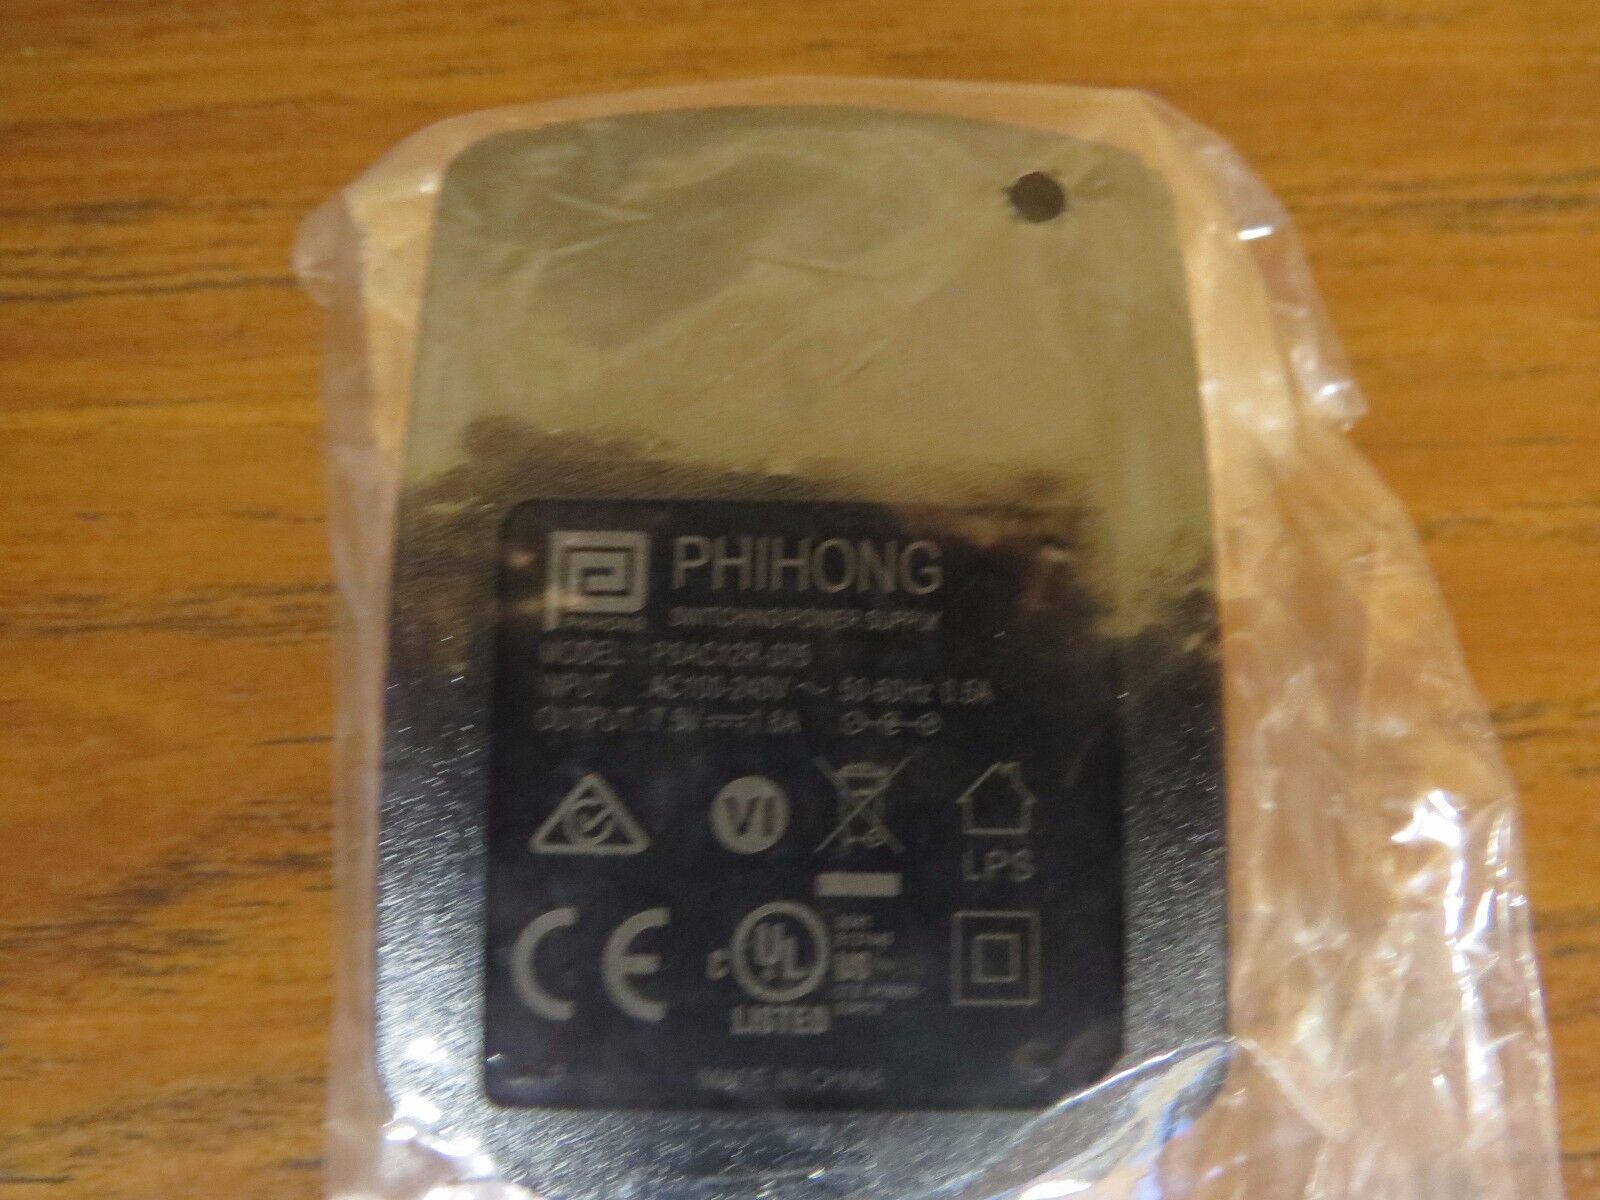 Phihong PSAC12R-075 7.5Volt 1.6Amp Watt Interchangeable Wall Adapter Type Adapter MPN PSAC12R-120-R Brand Phihong Phiho